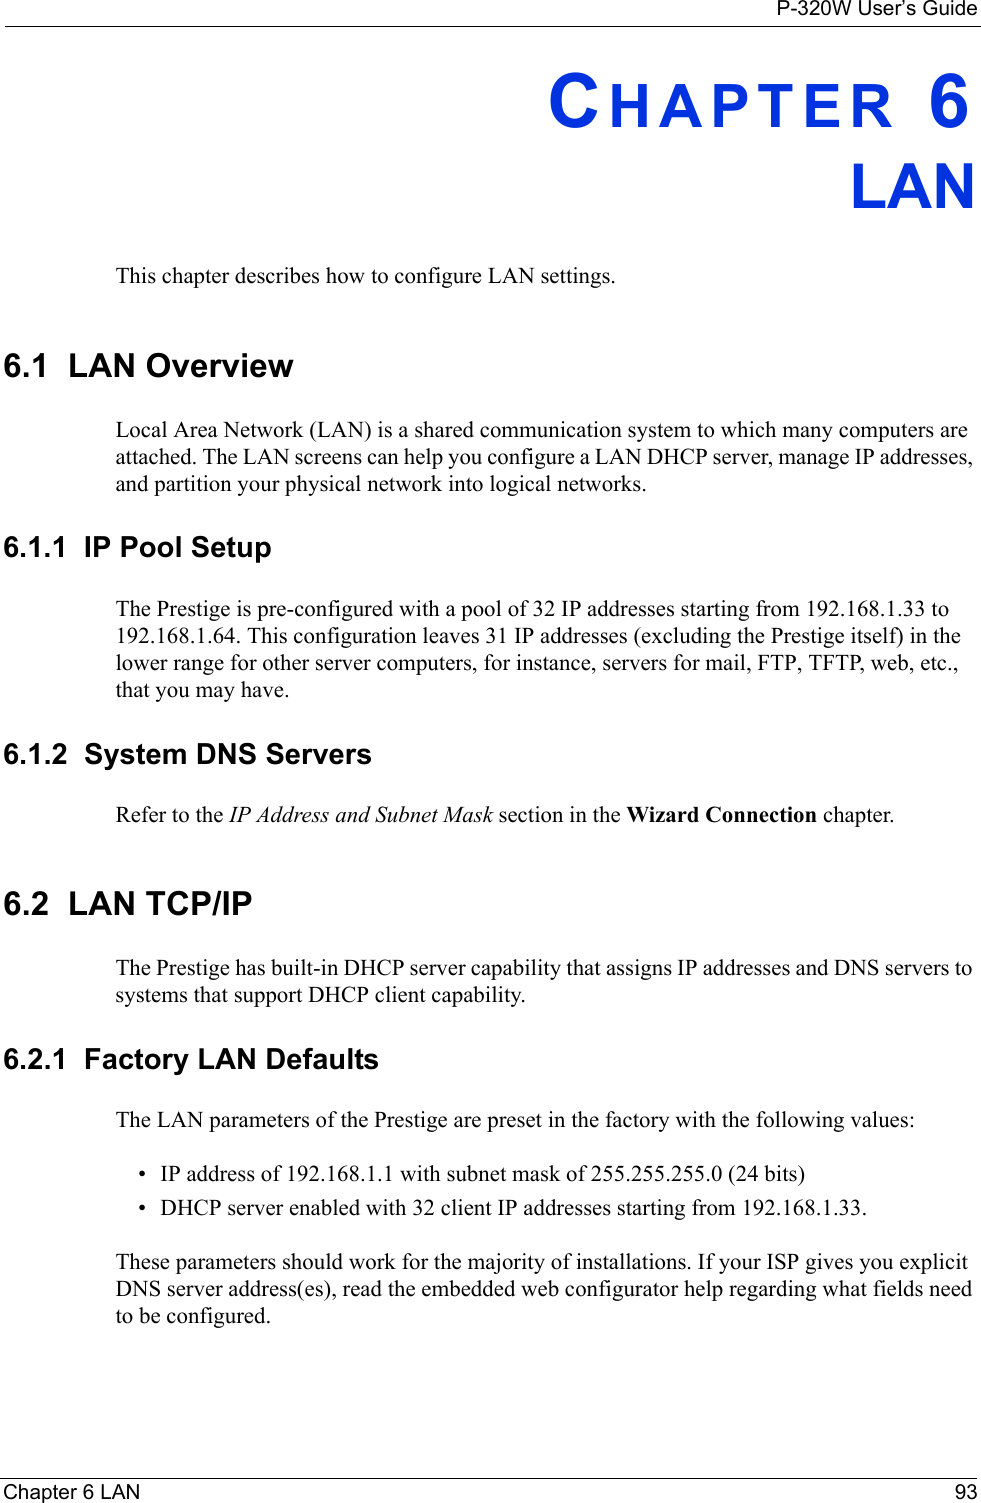 P-320W User’s GuideChapter 6 LAN 93CHAPTER 6LAN This chapter describes how to configure LAN settings.6.1  LAN OverviewLocal Area Network (LAN) is a shared communication system to which many computers are attached. The LAN screens can help you configure a LAN DHCP server, manage IP addresses, and partition your physical network into logical networks.  6.1.1  IP Pool SetupThe Prestige is pre-configured with a pool of 32 IP addresses starting from 192.168.1.33 to 192.168.1.64. This configuration leaves 31 IP addresses (excluding the Prestige itself) in the lower range for other server computers, for instance, servers for mail, FTP, TFTP, web, etc., that you may have.6.1.2  System DNS ServersRefer to the IP Address and Subnet Mask section in the Wizard Connection chapter.6.2  LAN TCP/IP The Prestige has built-in DHCP server capability that assigns IP addresses and DNS servers to systems that support DHCP client capability.6.2.1  Factory LAN DefaultsThe LAN parameters of the Prestige are preset in the factory with the following values:• IP address of 192.168.1.1 with subnet mask of 255.255.255.0 (24 bits)• DHCP server enabled with 32 client IP addresses starting from 192.168.1.33. These parameters should work for the majority of installations. If your ISP gives you explicit DNS server address(es), read the embedded web configurator help regarding what fields need to be configured.